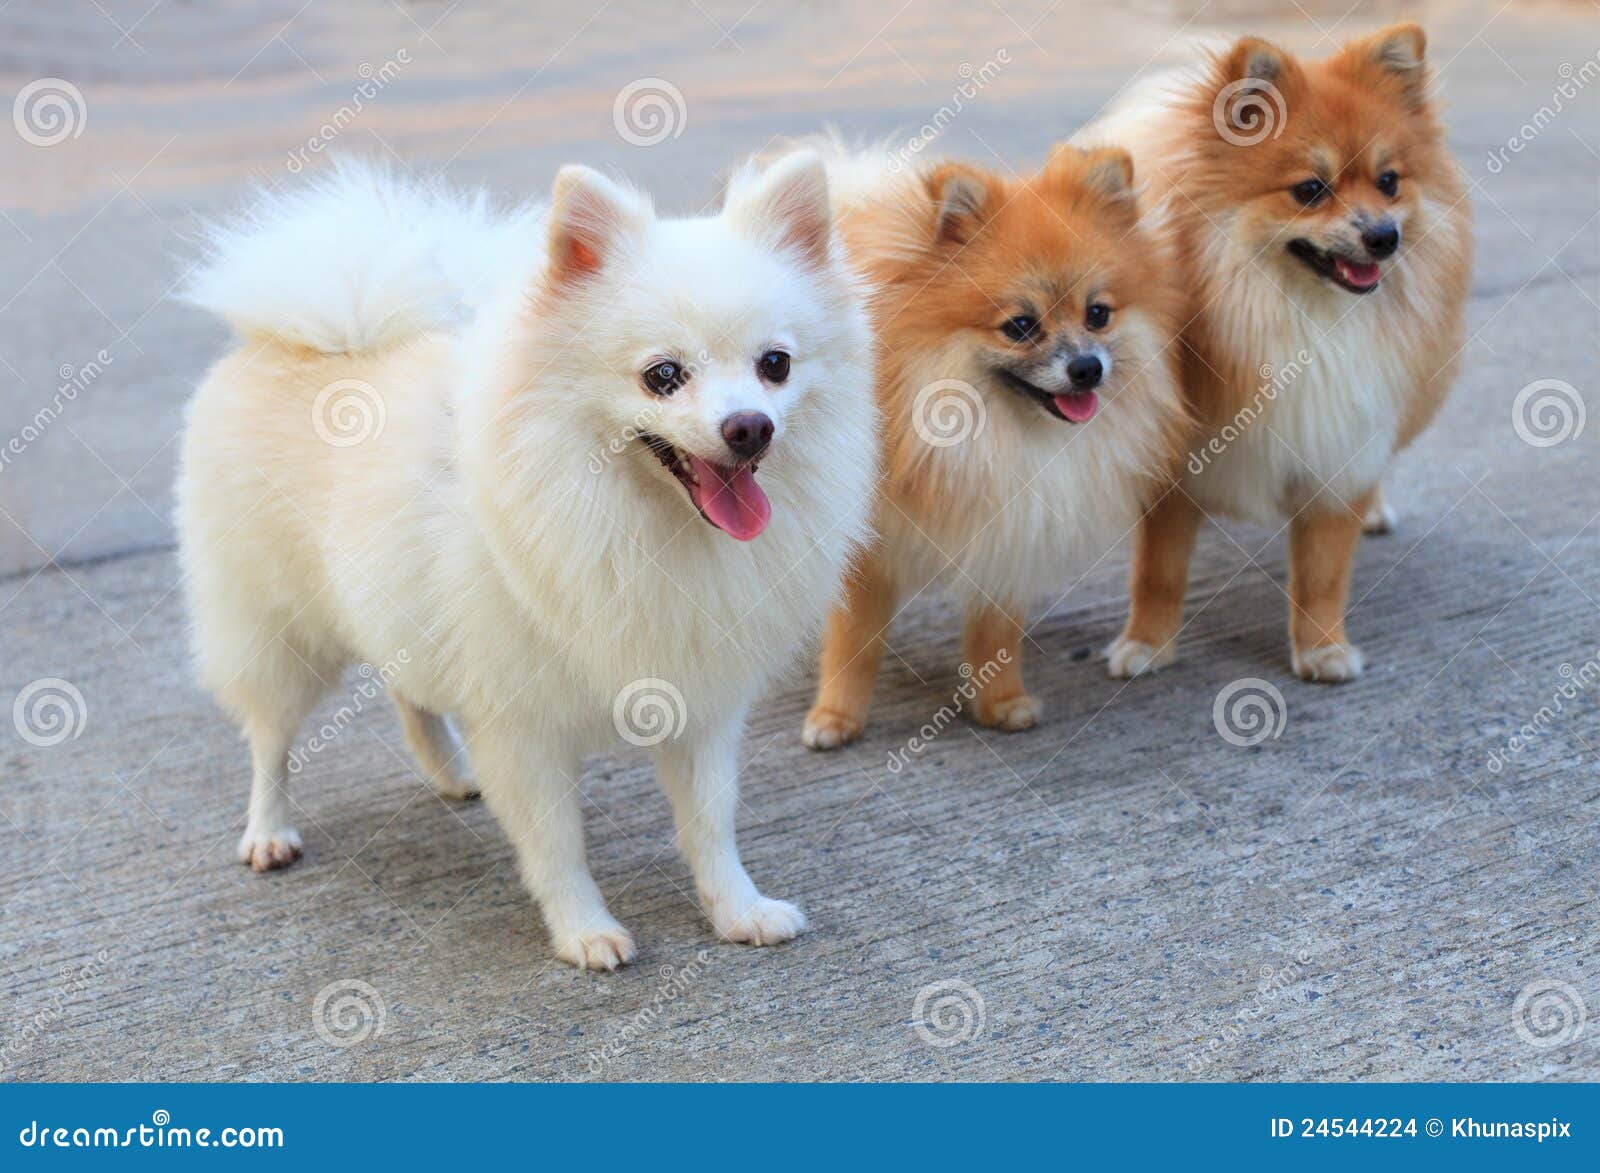 Group of White Pomeranian Dog and Brown Color Stock Photo - Image ...